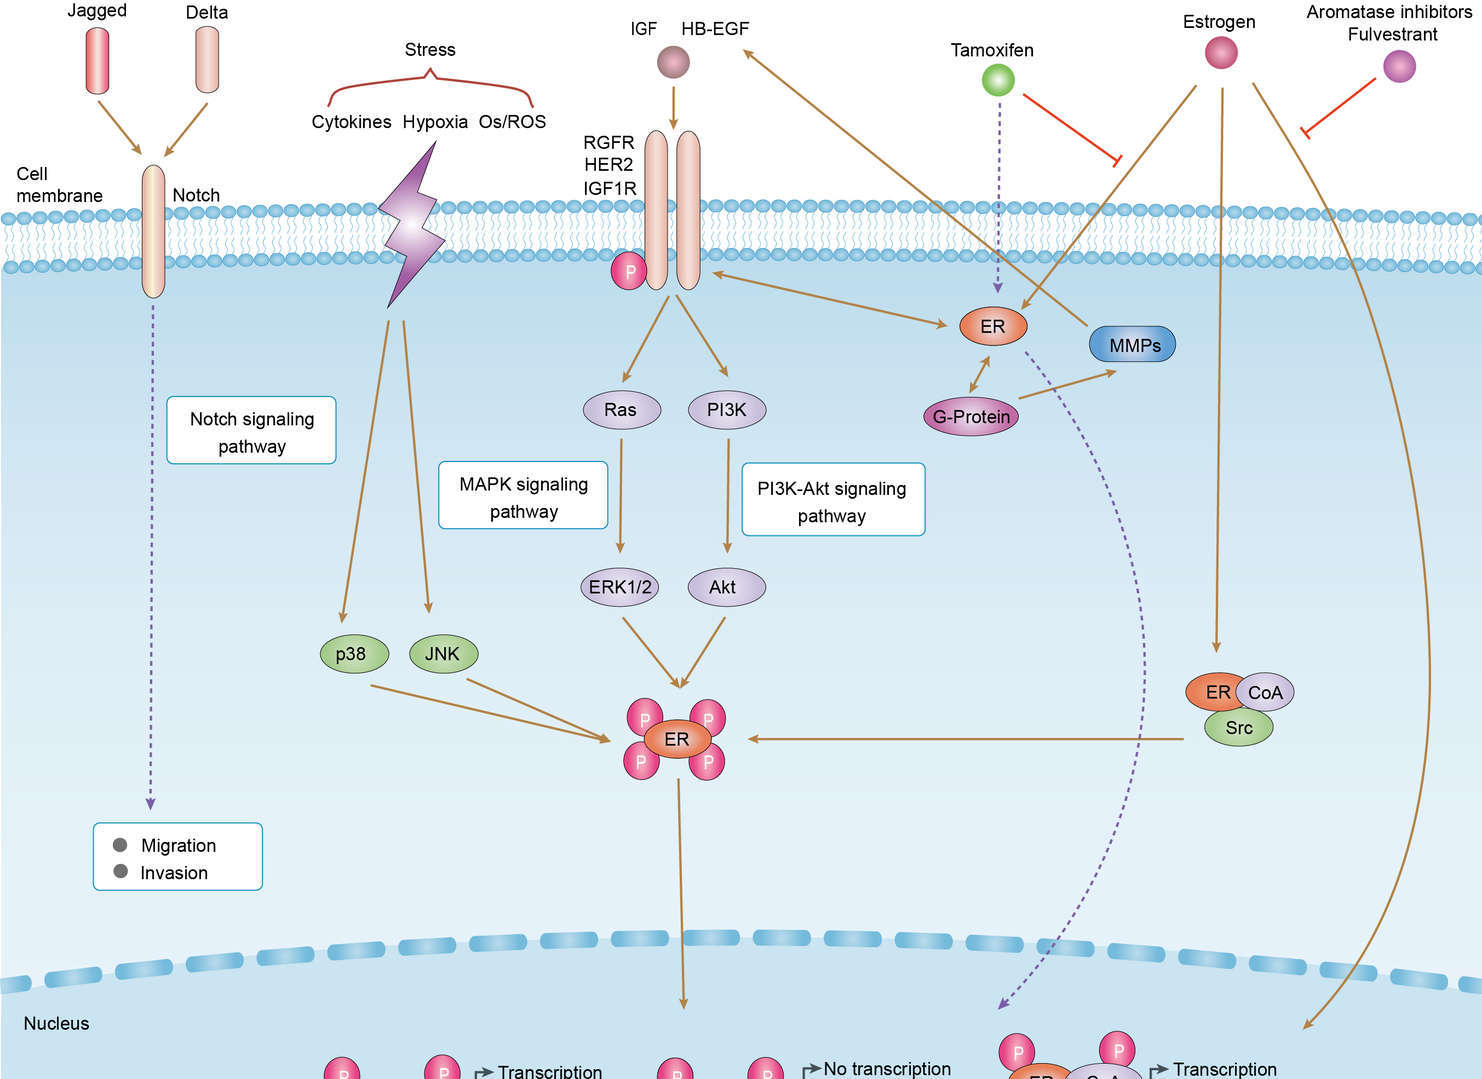 Endocrine Resistance Overview - Pathways, Diagnosis, Targeted Therapies